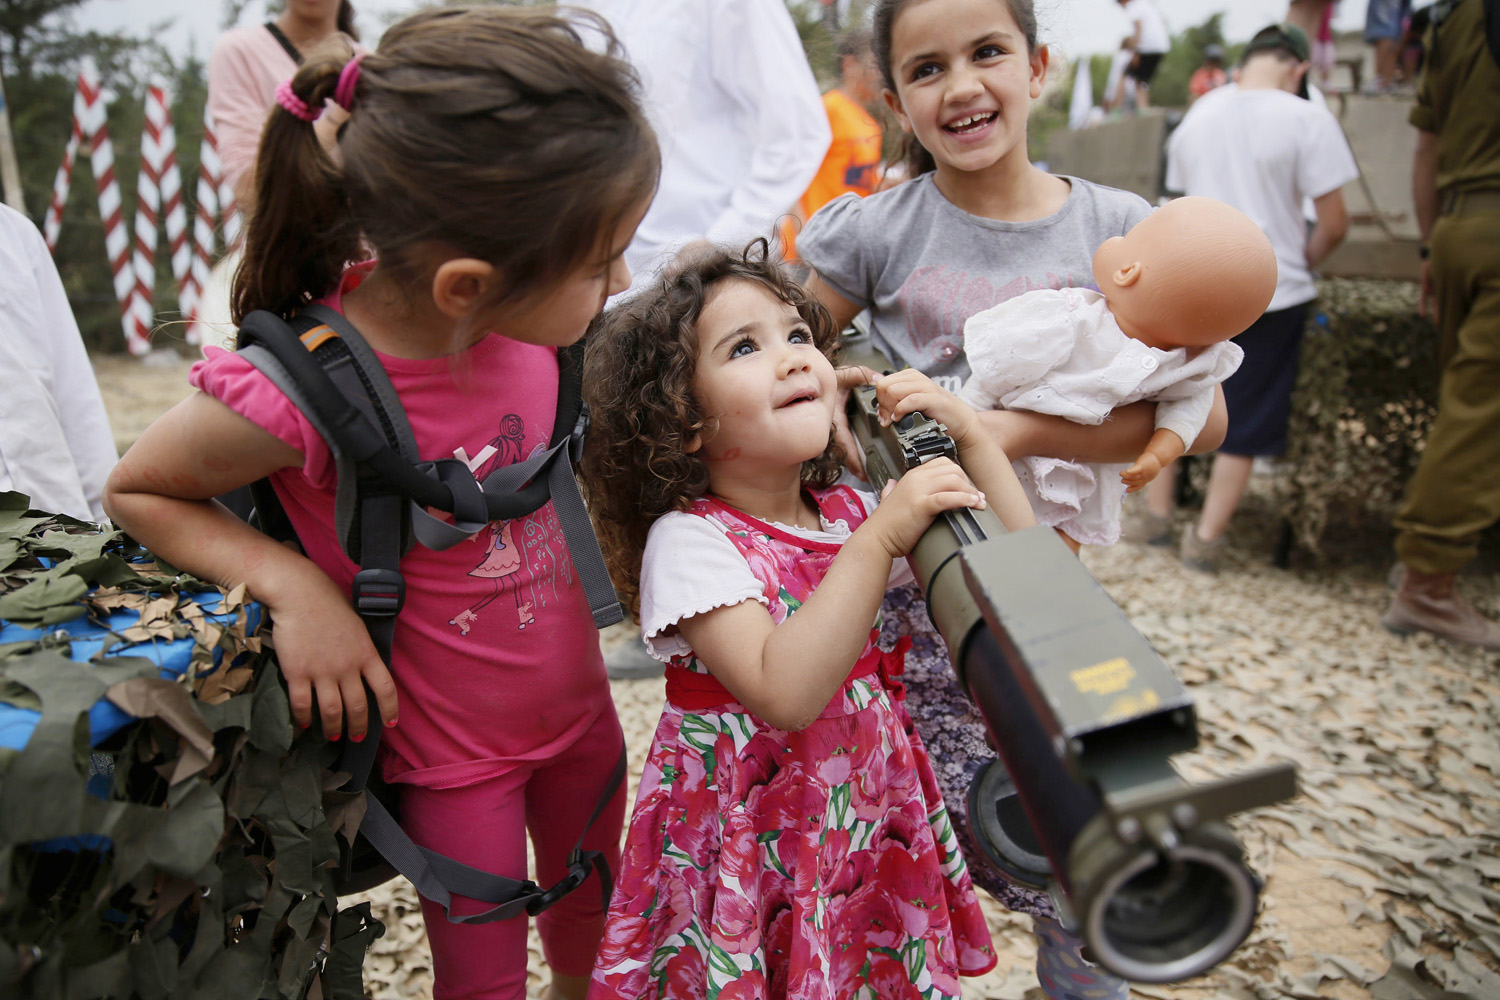 An Israeli child holds a rocket launcher during a traditional military weapon display to mark the 66th anniversary of Israel's Independence at the West Bank settlement of Efrat near the biblical city of Bethlehem on May 6, 2014.